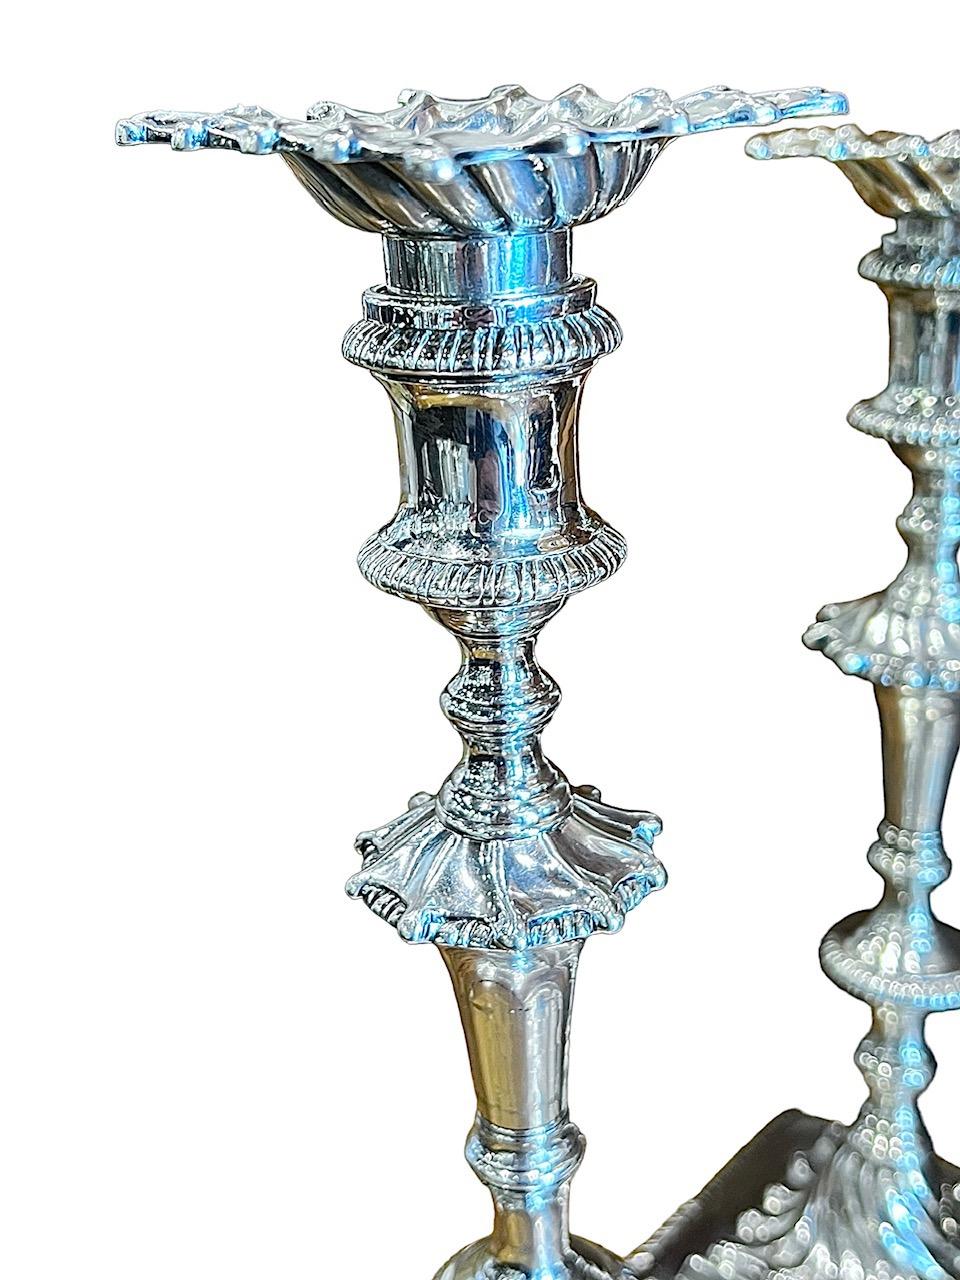 1763 Pair of George III Sterling Silver Candlesticks by William Cafe, English For Sale 11